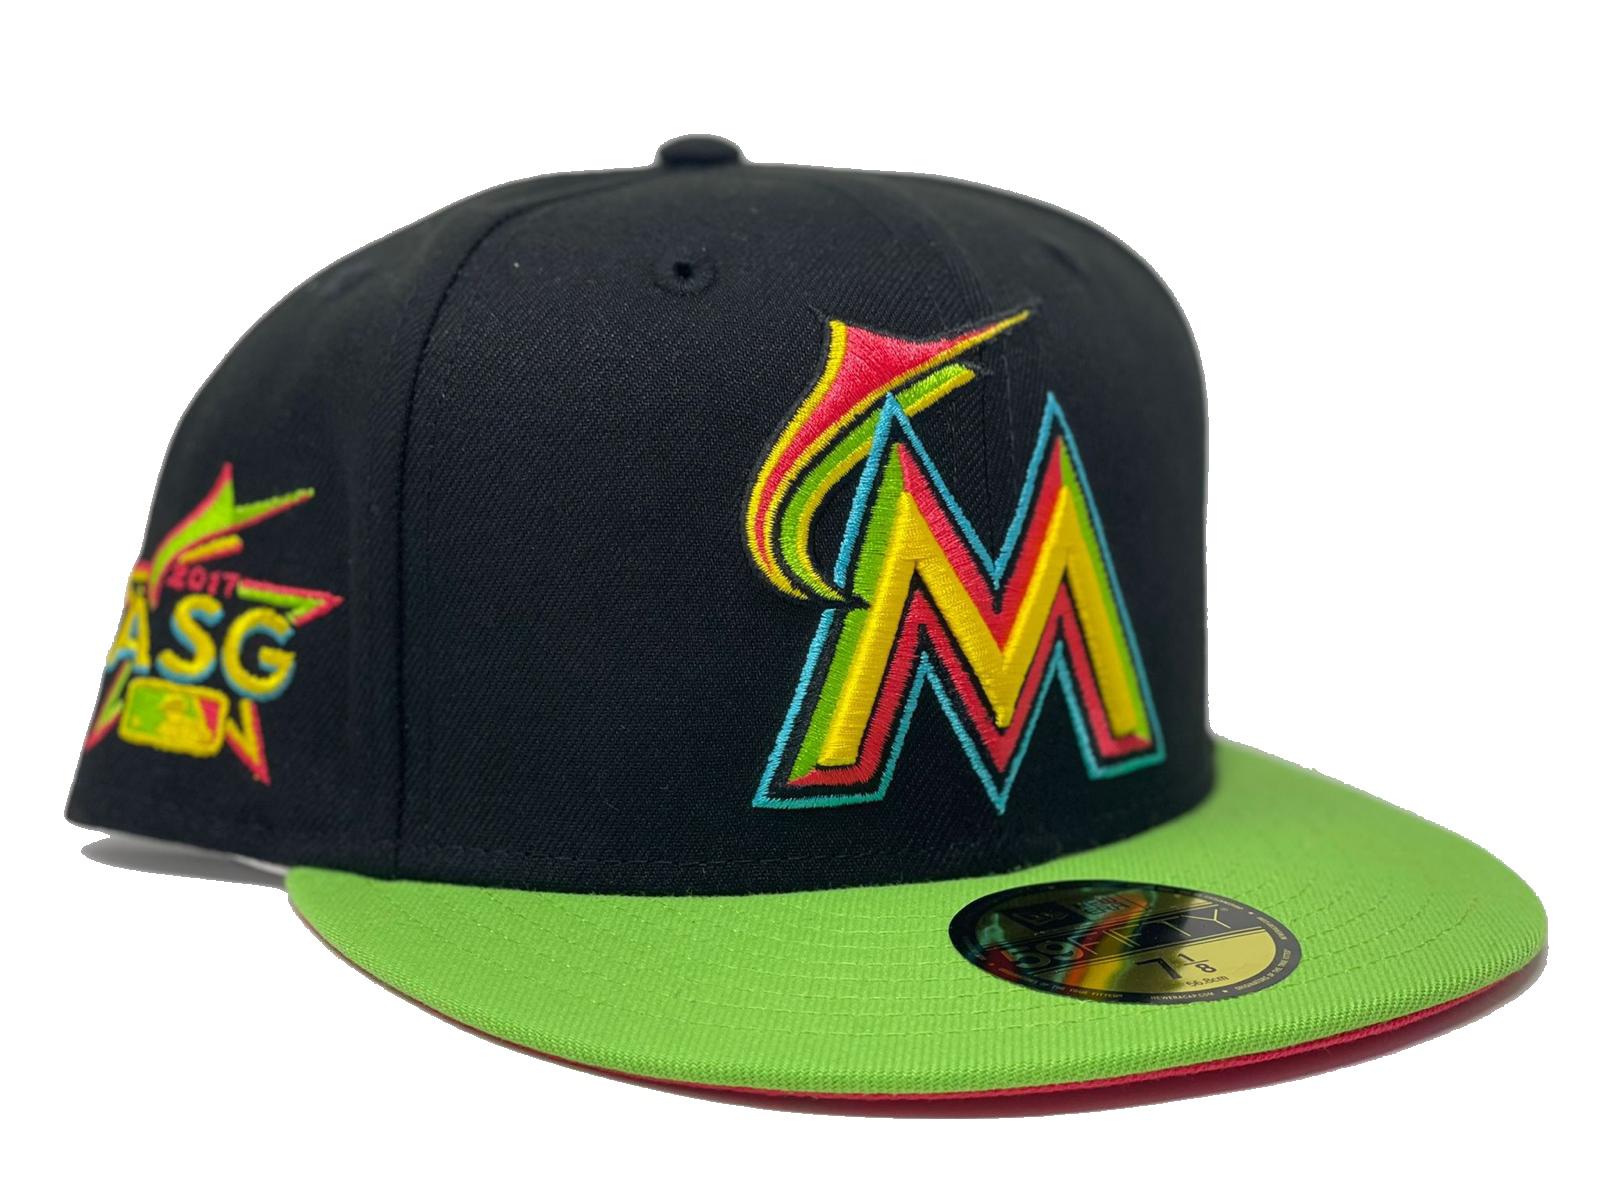 Men's New Era White/Black Miami Marlins 2017 MLB All-Star Game Primary Eye 59FIFTY Fitted Hat